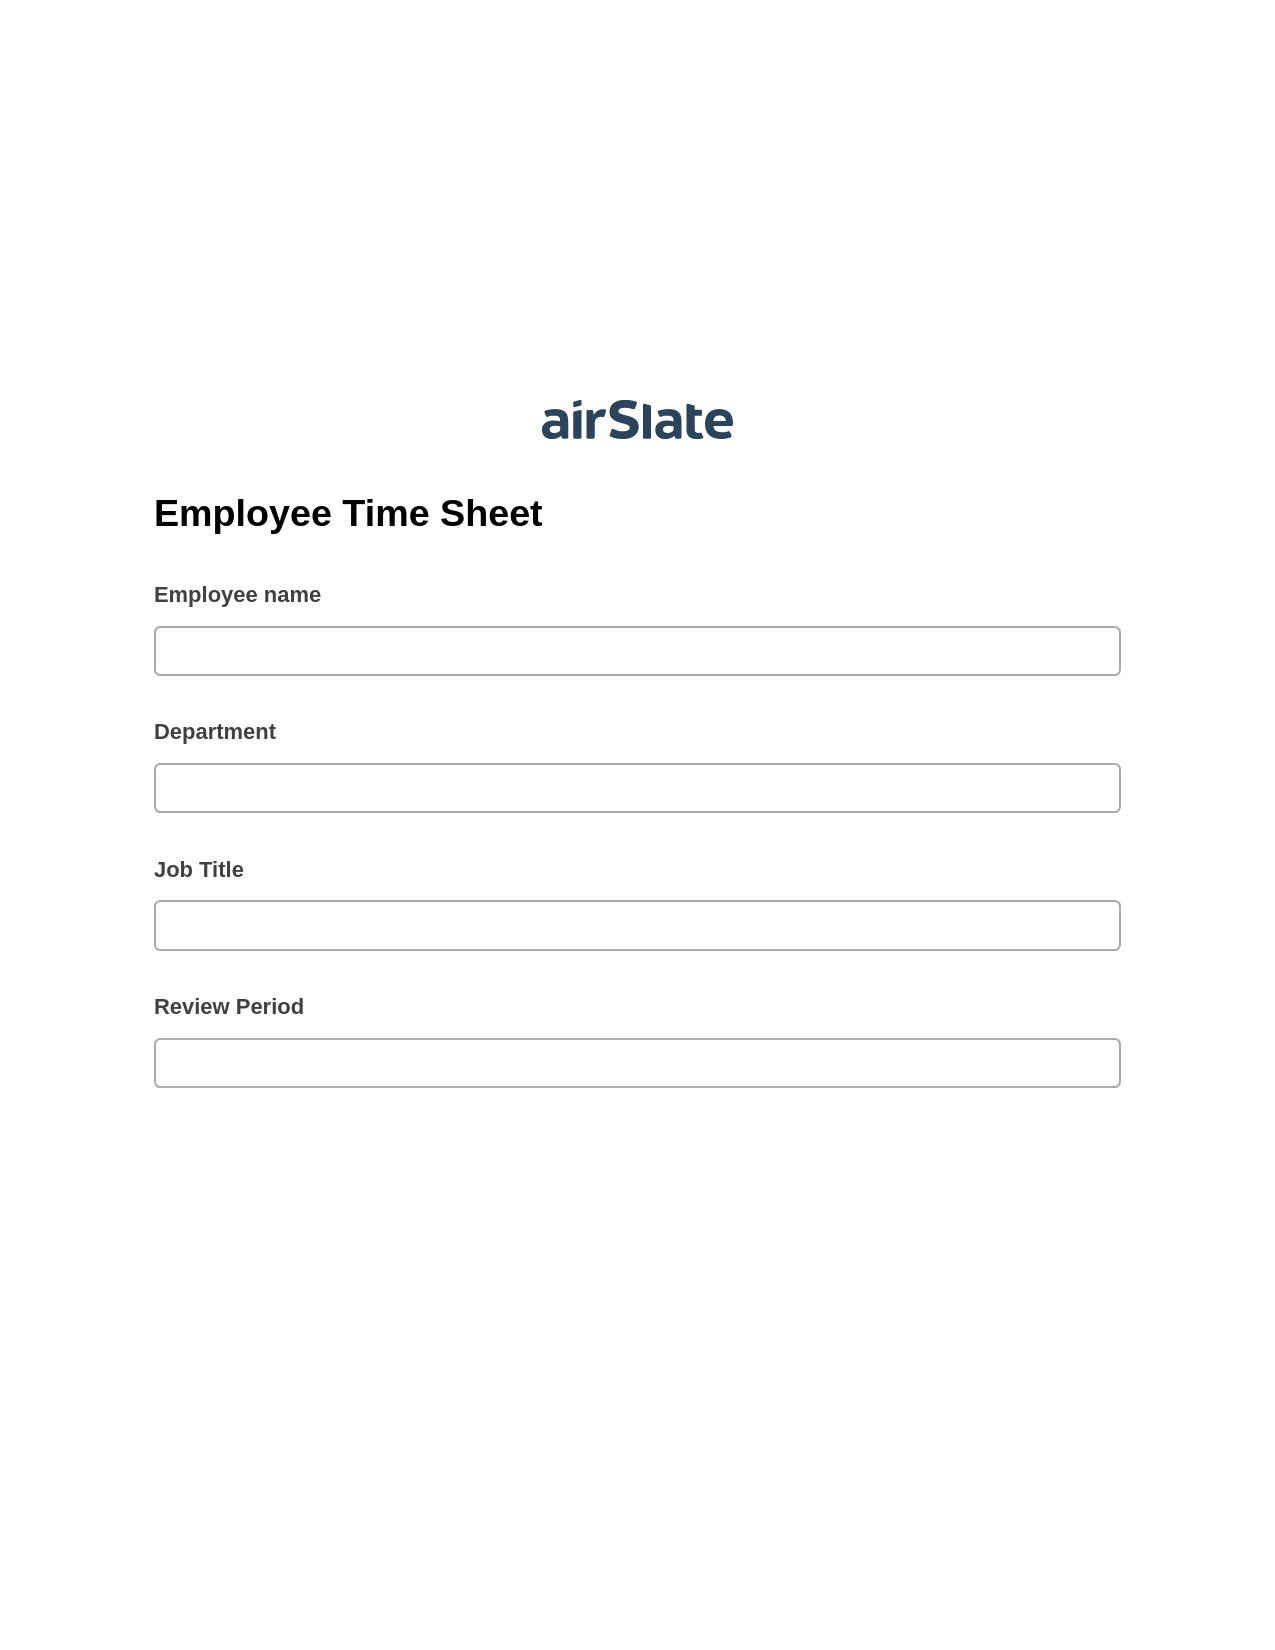 Employee Time Sheet Pre-fill Document Bot, Custom Field's Value Bot, Text Message Notification Postfinish Bot